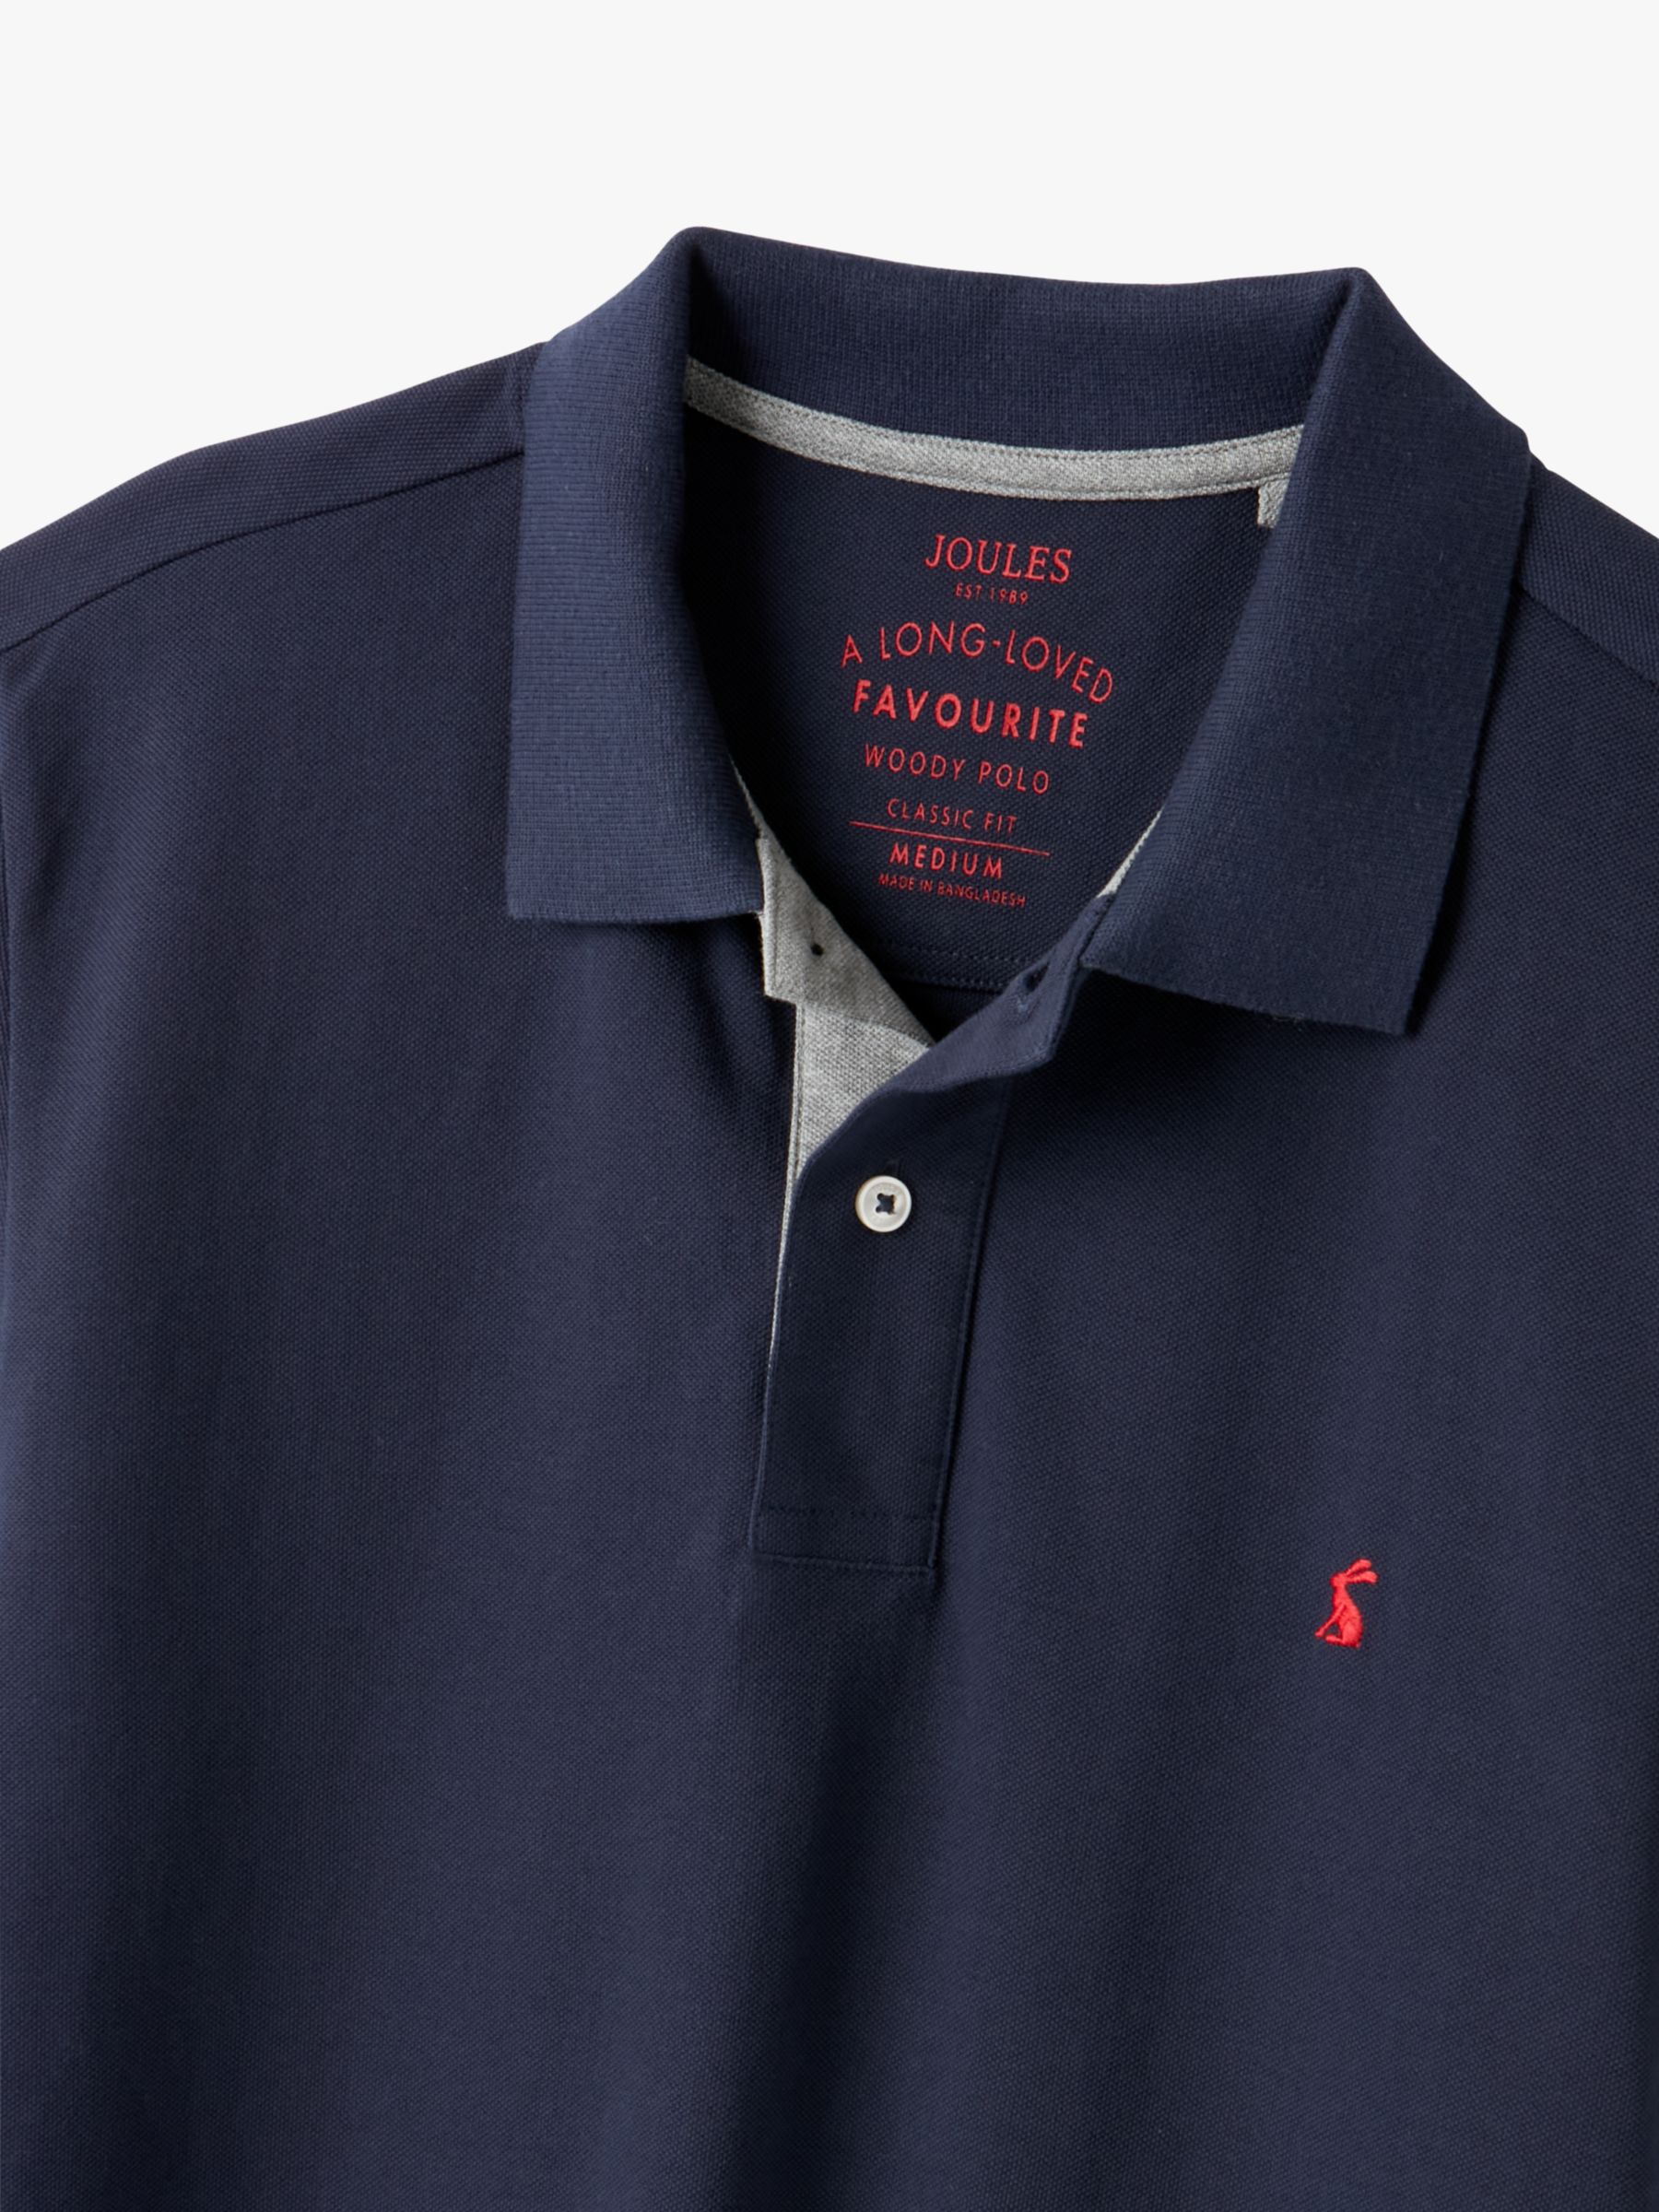 Joules Classic Fit Polo Shirt, Dark Blue at John Lewis & Partners